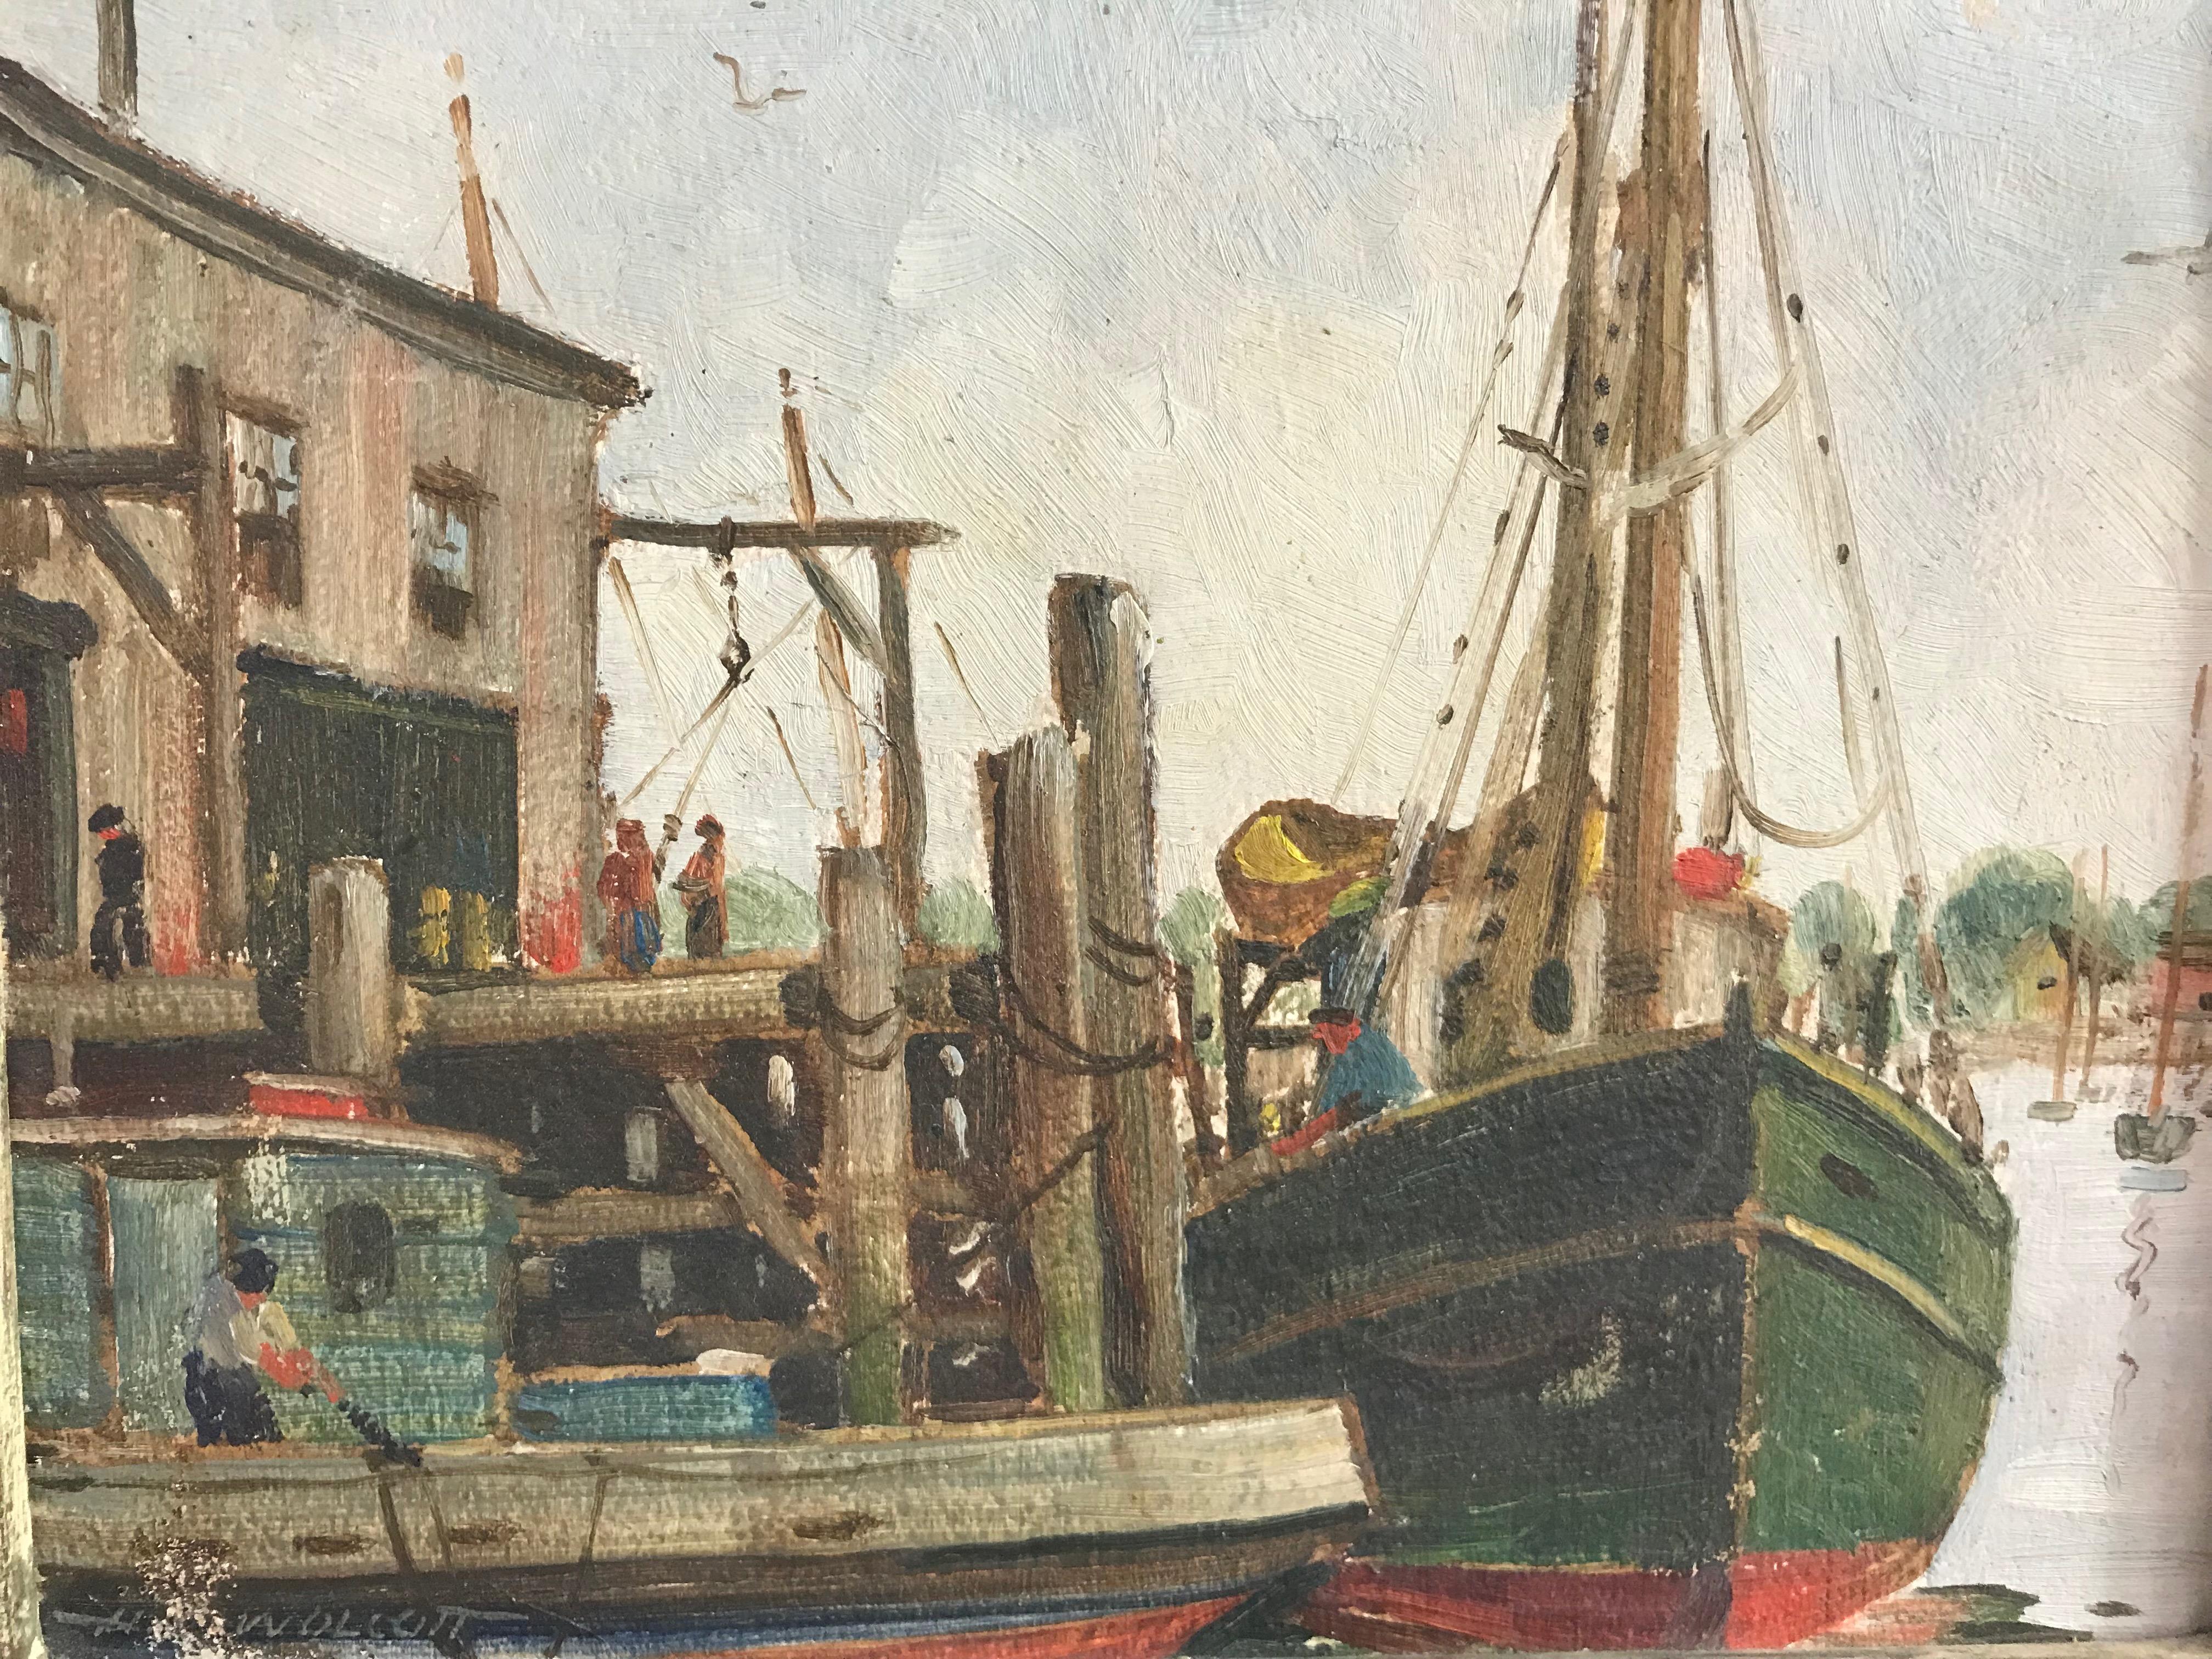 A small new England harbor scene painting by artist H. C. Wolcott (b.1898-d.1977). Titled on the back Fishing Boats, Gloucester Mass.
Oil on canvas in carved wood frame.
Early to mid-20th century.
Wolcott was born in New York in 1898 and served